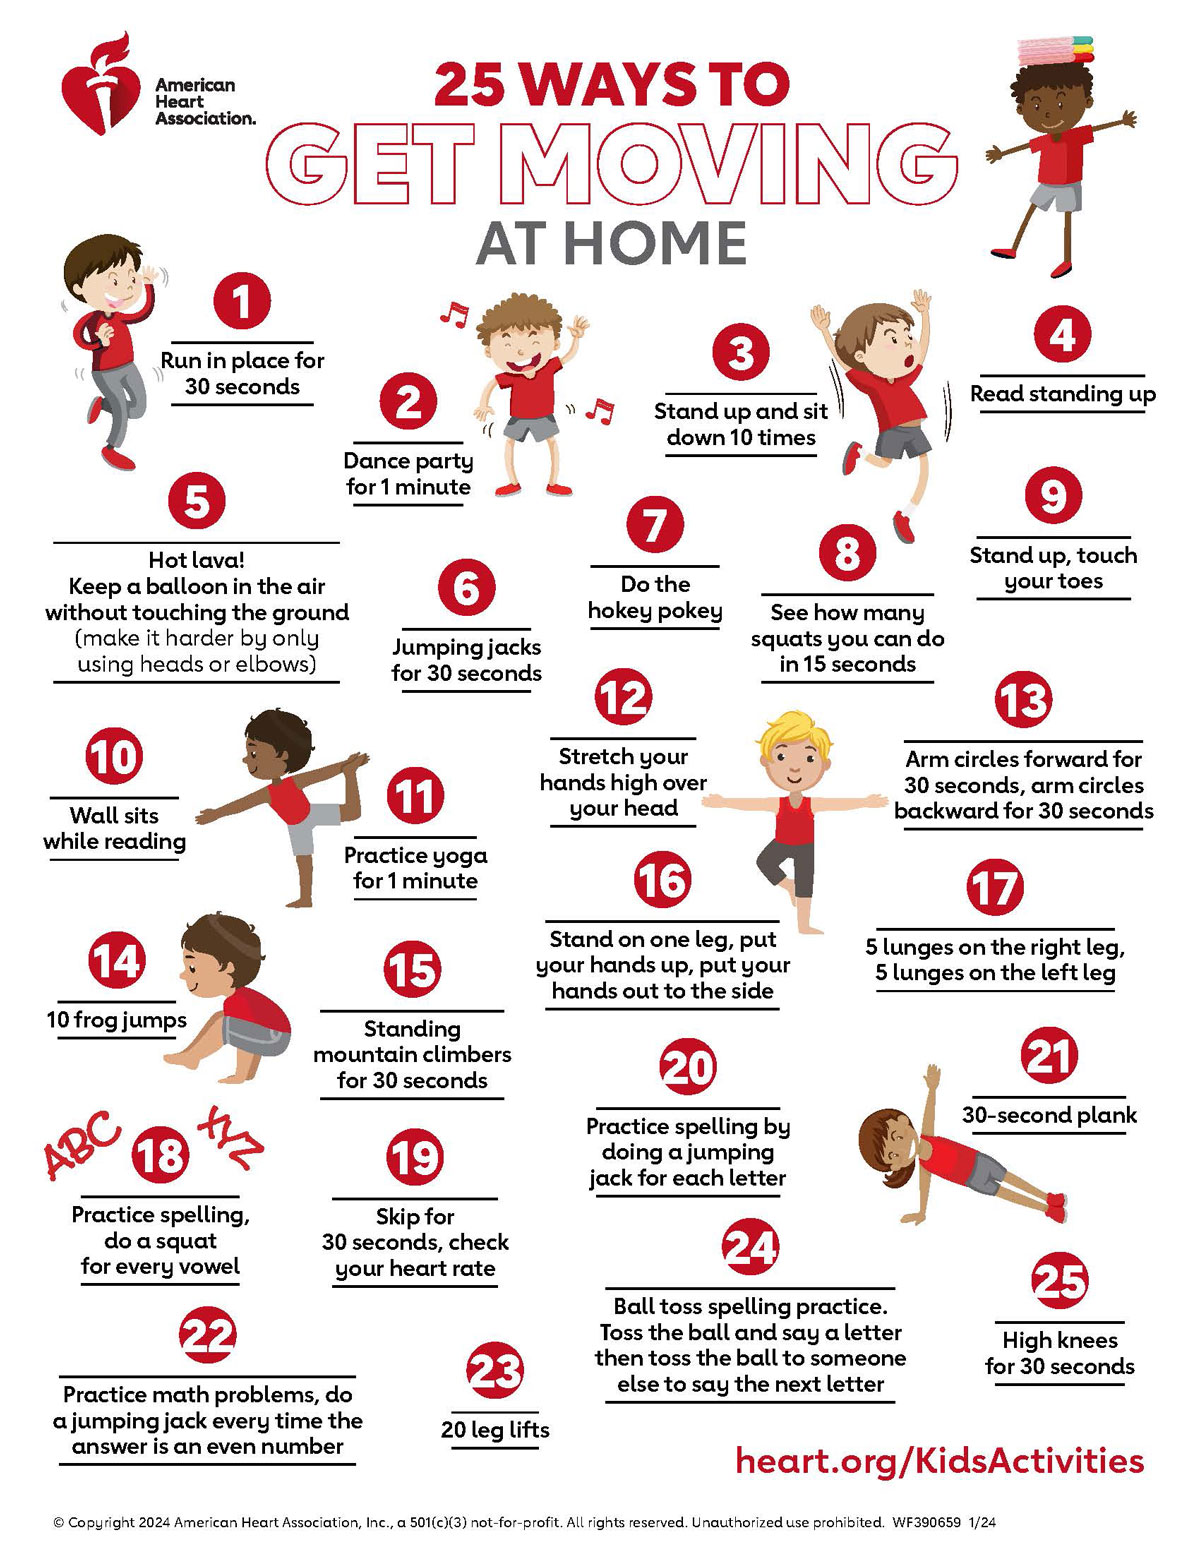 https://www.heart.org/-/media/Healthy-Living-Images/Infographics/25_Ways_to_Get_Moving_at_home.jpg